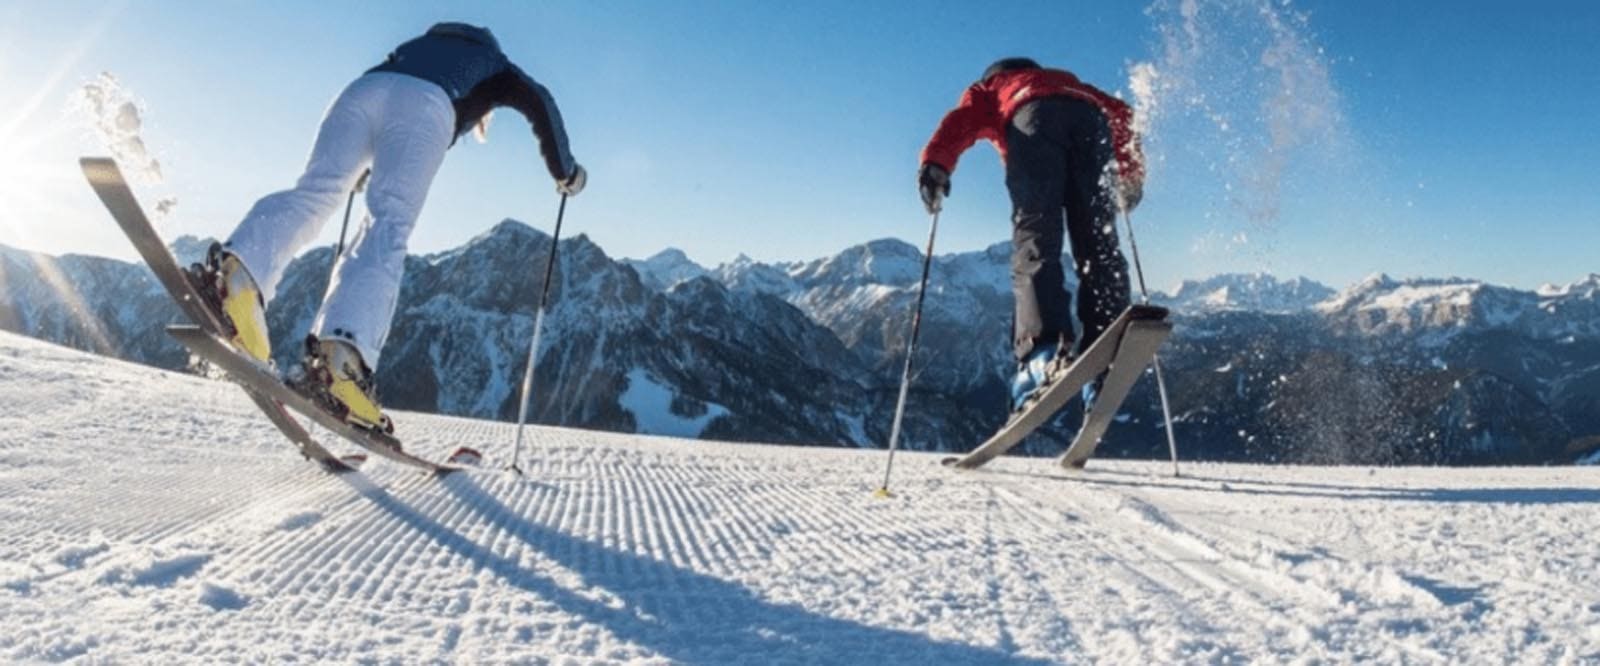 Two skiers pushing off down a ski slope in the Italian Alps